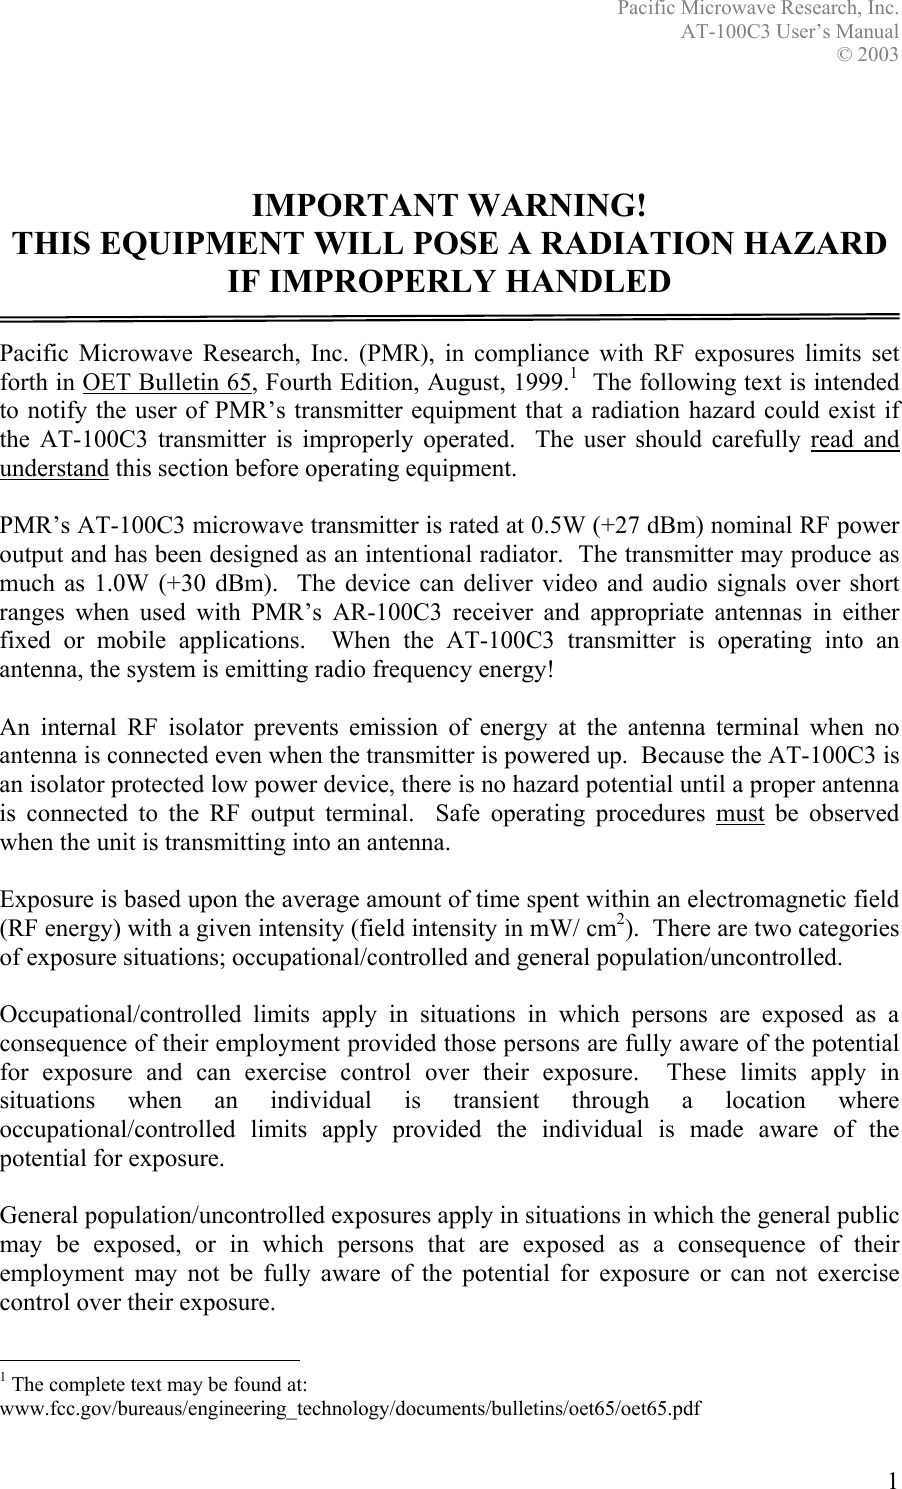 Pacific Microwave Research, Inc. AT-100C3 User’s Manual  © 2003 1    IMPORTANT WARNING! THIS EQUIPMENT WILL POSE A RADIATION HAZARD IF IMPROPERLY HANDLED  Pacific Microwave Research, Inc. (PMR), in compliance with RF exposures limits set forth in OET Bulletin 65, Fourth Edition, August, 1999.1  The following text is intended to notify the user of PMR’s transmitter equipment that a radiation hazard could exist if the AT-100C3 transmitter is improperly operated.  The user should carefully read and understand this section before operating equipment.  PMR’s AT-100C3 microwave transmitter is rated at 0.5W (+27 dBm) nominal RF power output and has been designed as an intentional radiator.  The transmitter may produce as much as 1.0W (+30 dBm).  The device can deliver video and audio signals over short ranges when used with PMR’s AR-100C3 receiver and appropriate antennas in either fixed or mobile applications.  When the AT-100C3 transmitter is operating into an antenna, the system is emitting radio frequency energy!    An internal RF isolator prevents emission of energy at the antenna terminal when no antenna is connected even when the transmitter is powered up.  Because the AT-100C3 is an isolator protected low power device, there is no hazard potential until a proper antenna is connected to the RF output terminal.  Safe operating procedures must be observed when the unit is transmitting into an antenna.  Exposure is based upon the average amount of time spent within an electromagnetic field (RF energy) with a given intensity (field intensity in mW/ cm2).  There are two categories of exposure situations; occupational/controlled and general population/uncontrolled.  Occupational/controlled limits apply in situations in which persons are exposed as a consequence of their employment provided those persons are fully aware of the potential for exposure and can exercise control over their exposure.  These limits apply in situations when an individual is transient through a location where occupational/controlled limits apply provided the individual is made aware of the potential for exposure.  General population/uncontrolled exposures apply in situations in which the general public may be exposed, or in which persons that are exposed as a consequence of their employment may not be fully aware of the potential for exposure or can not exercise control over their exposure.                                                  1 The complete text may be found at: www.fcc.gov/bureaus/engineering_technology/documents/bulletins/oet65/oet65.pdf 